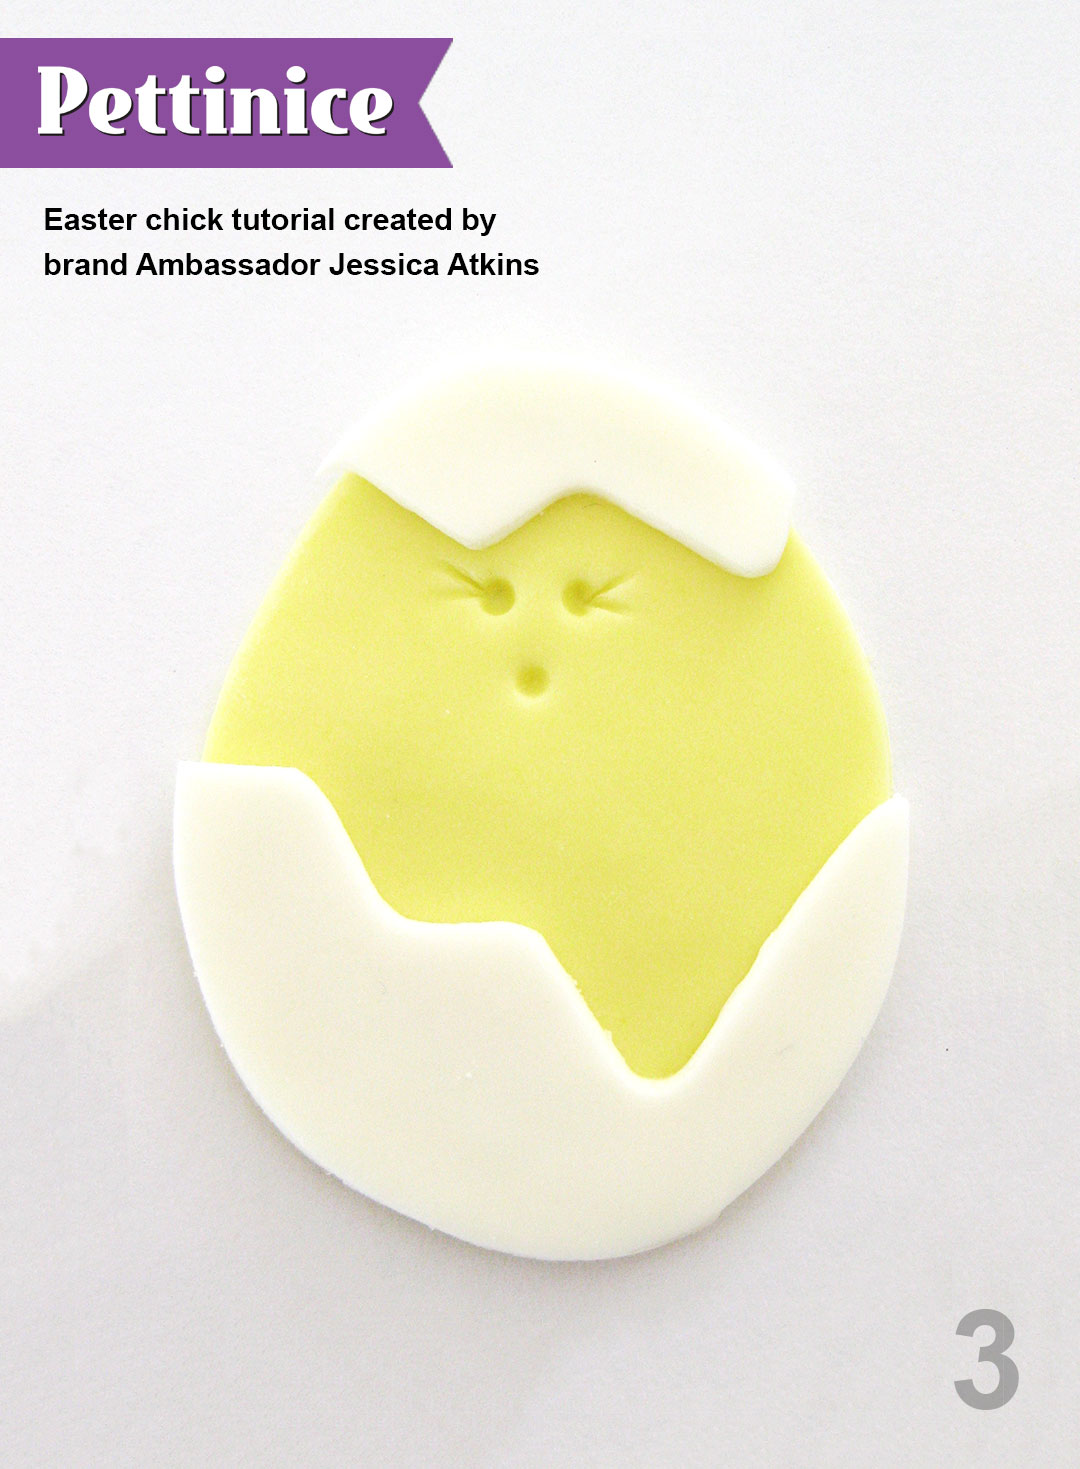 Step 3: Using a light touch to dampen fondant, stick the egg onto the yellow chick.